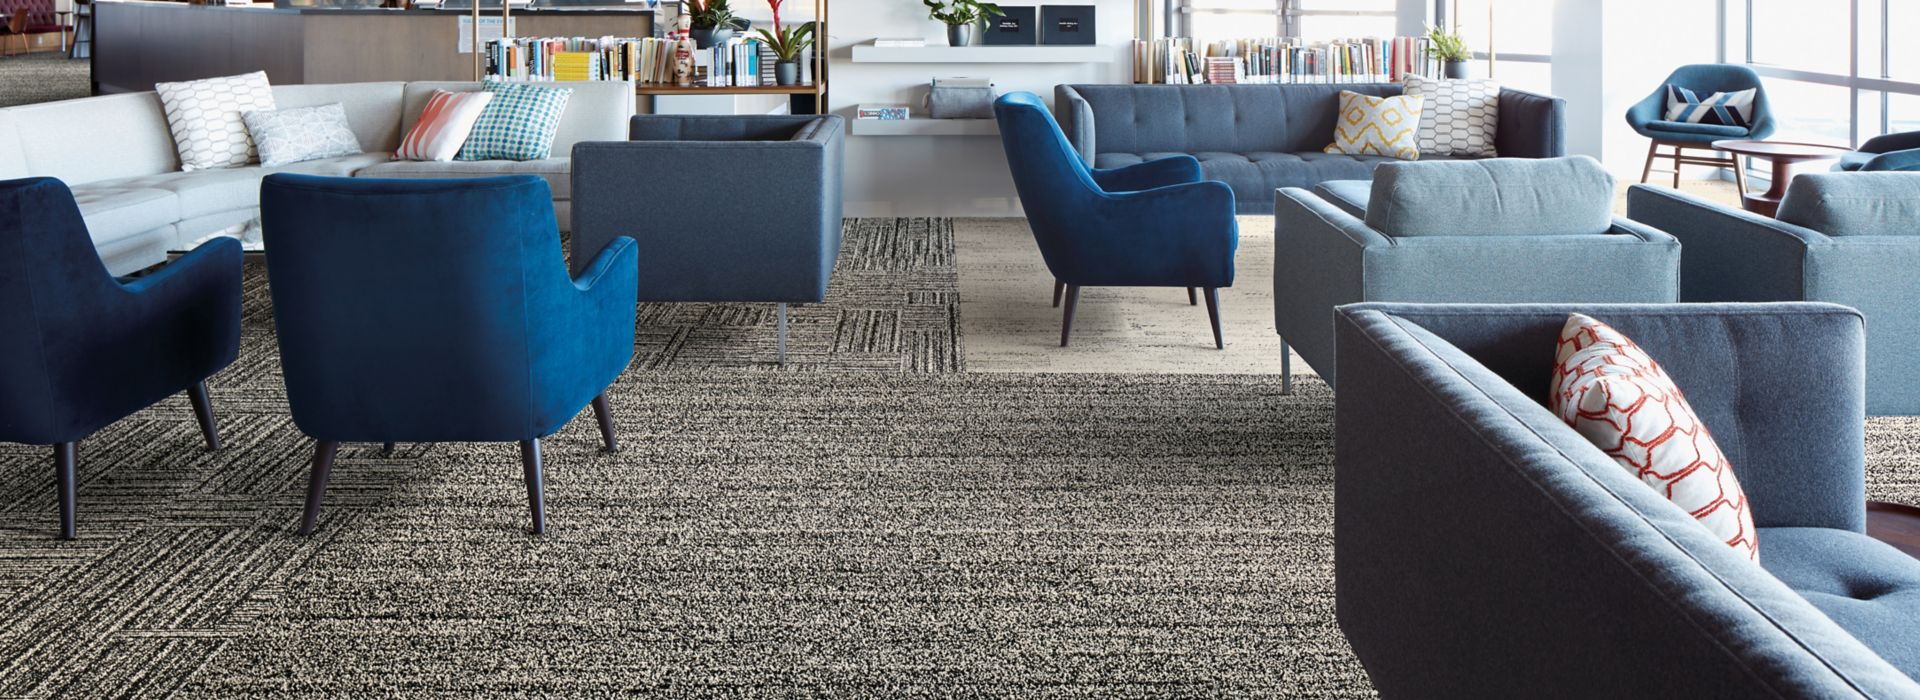 Interface Overedge plank carpet tile in open lounge area with chairs and couches